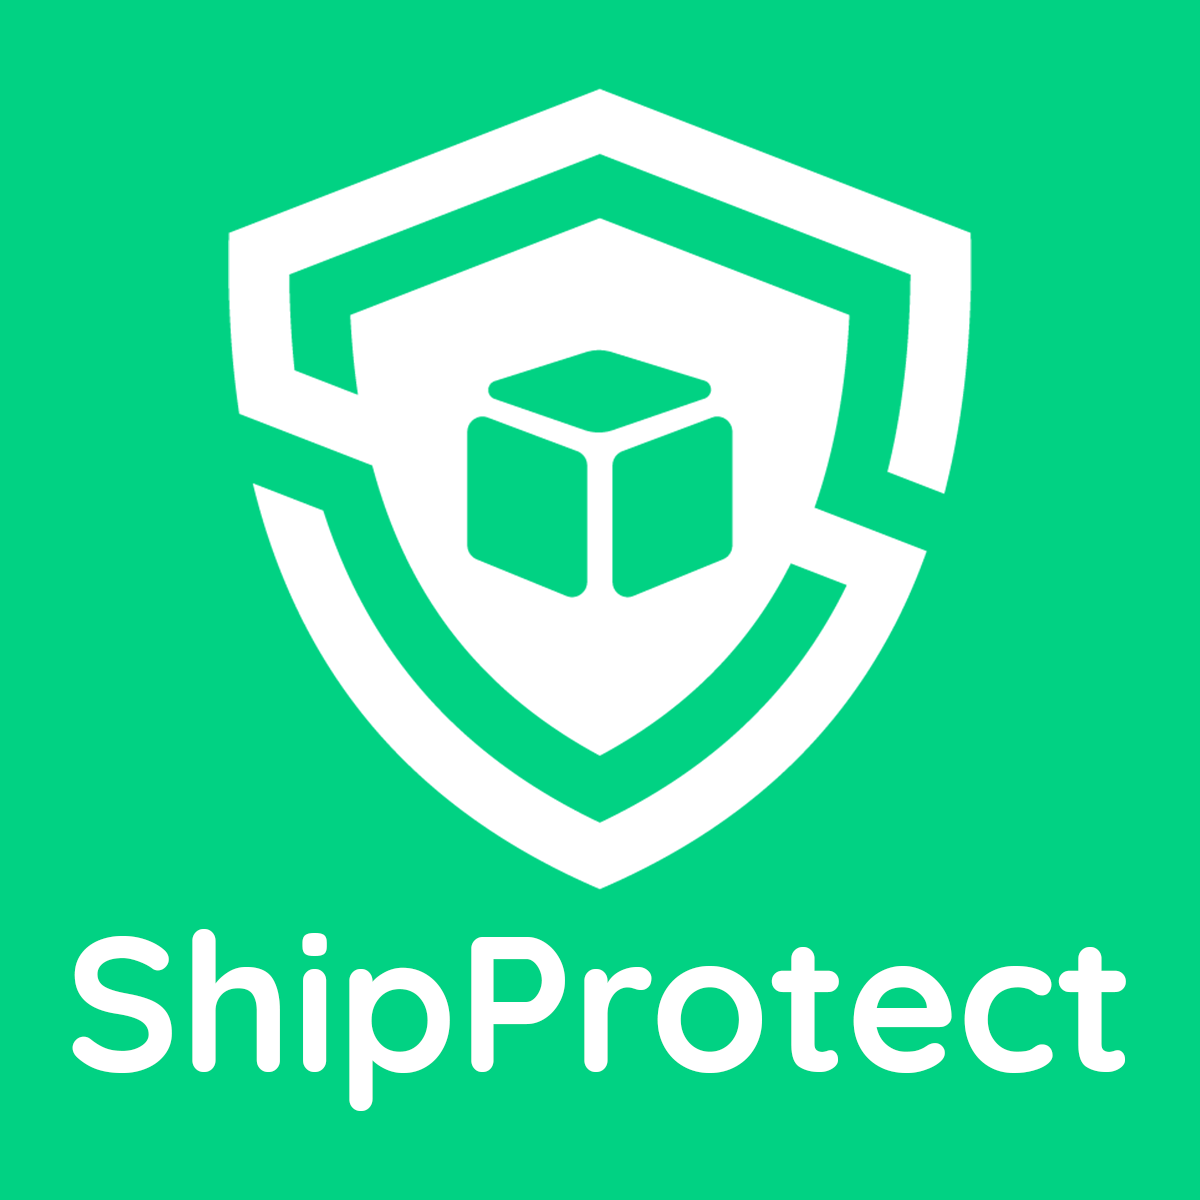 Hire Shopify Experts to integrate Shipping Protection +Insurance app into a Shopify store